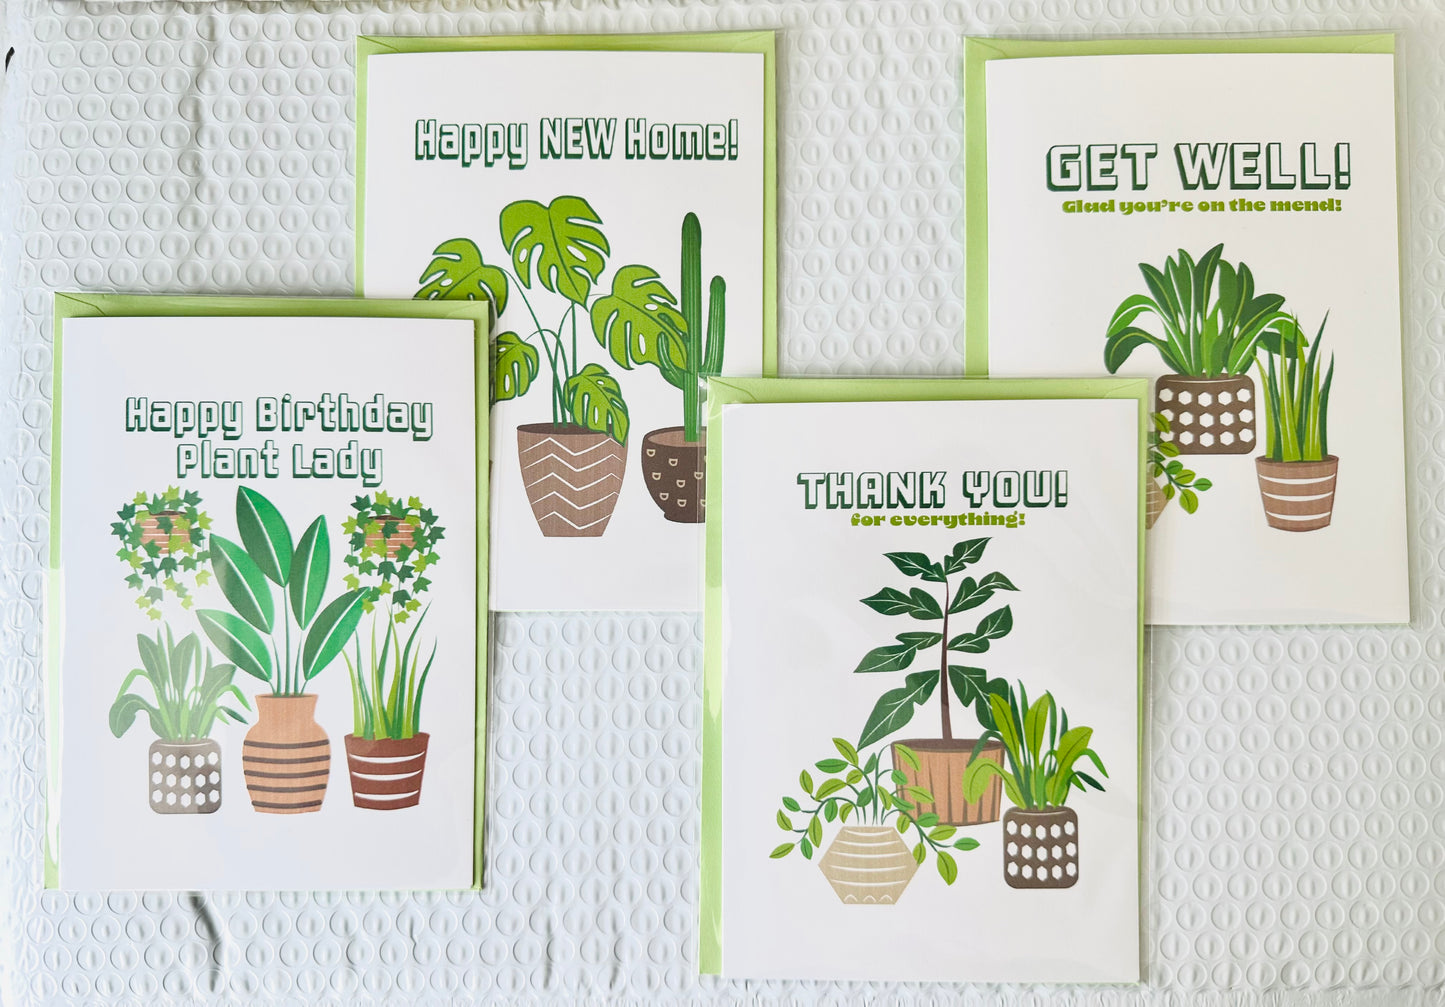 Happy Birthday Plant Lady! 5x7 Plant Greeting card for those plant people in our lives